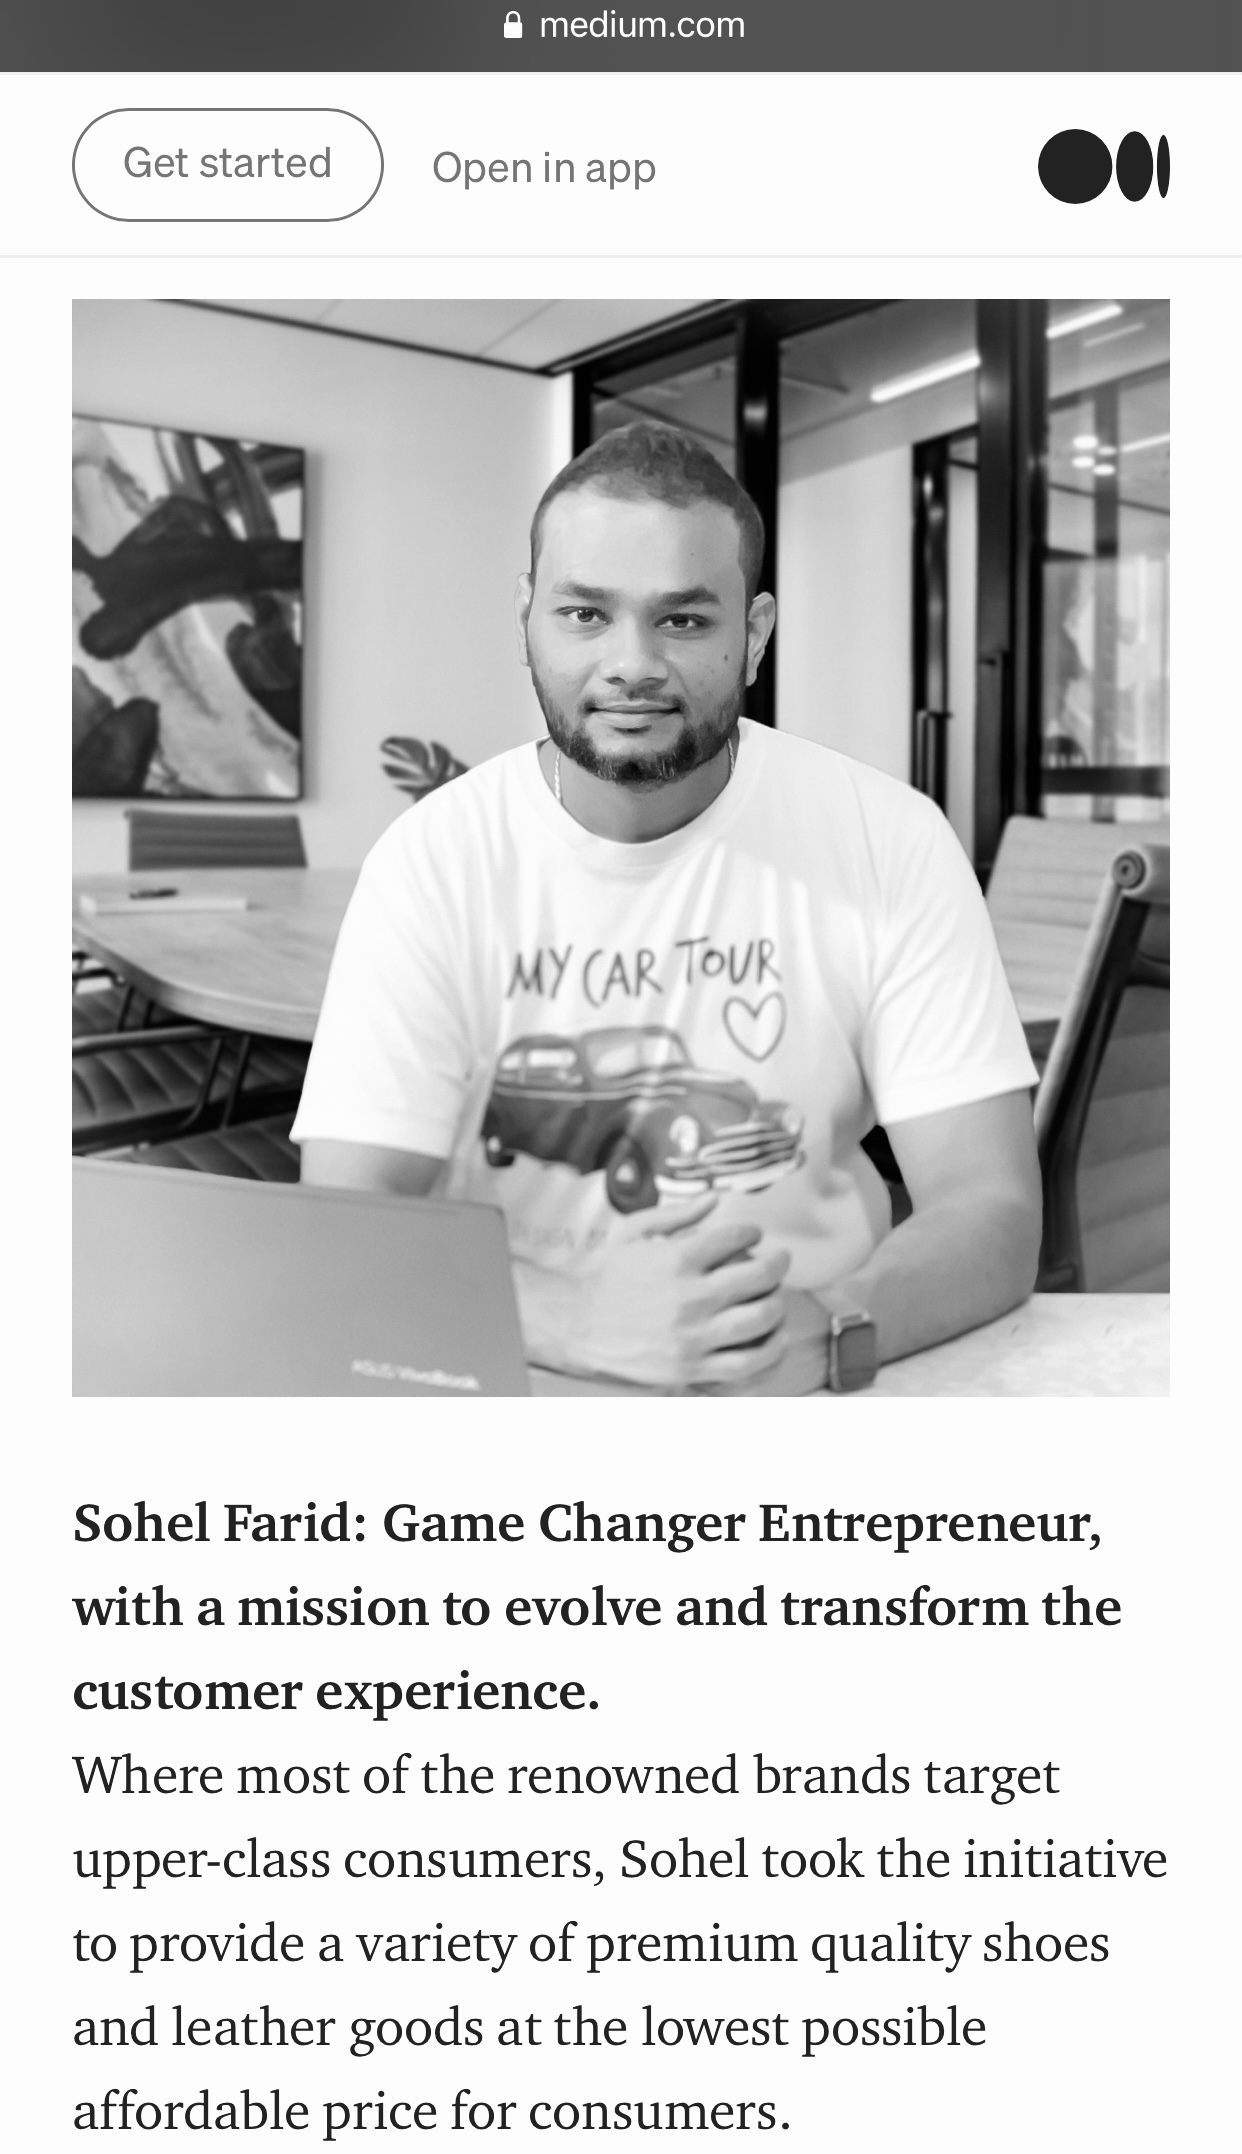 You are currently viewing Sohel Farid: Game Changer Entrepreneur, with a mission to evolve and transform the customer experience.